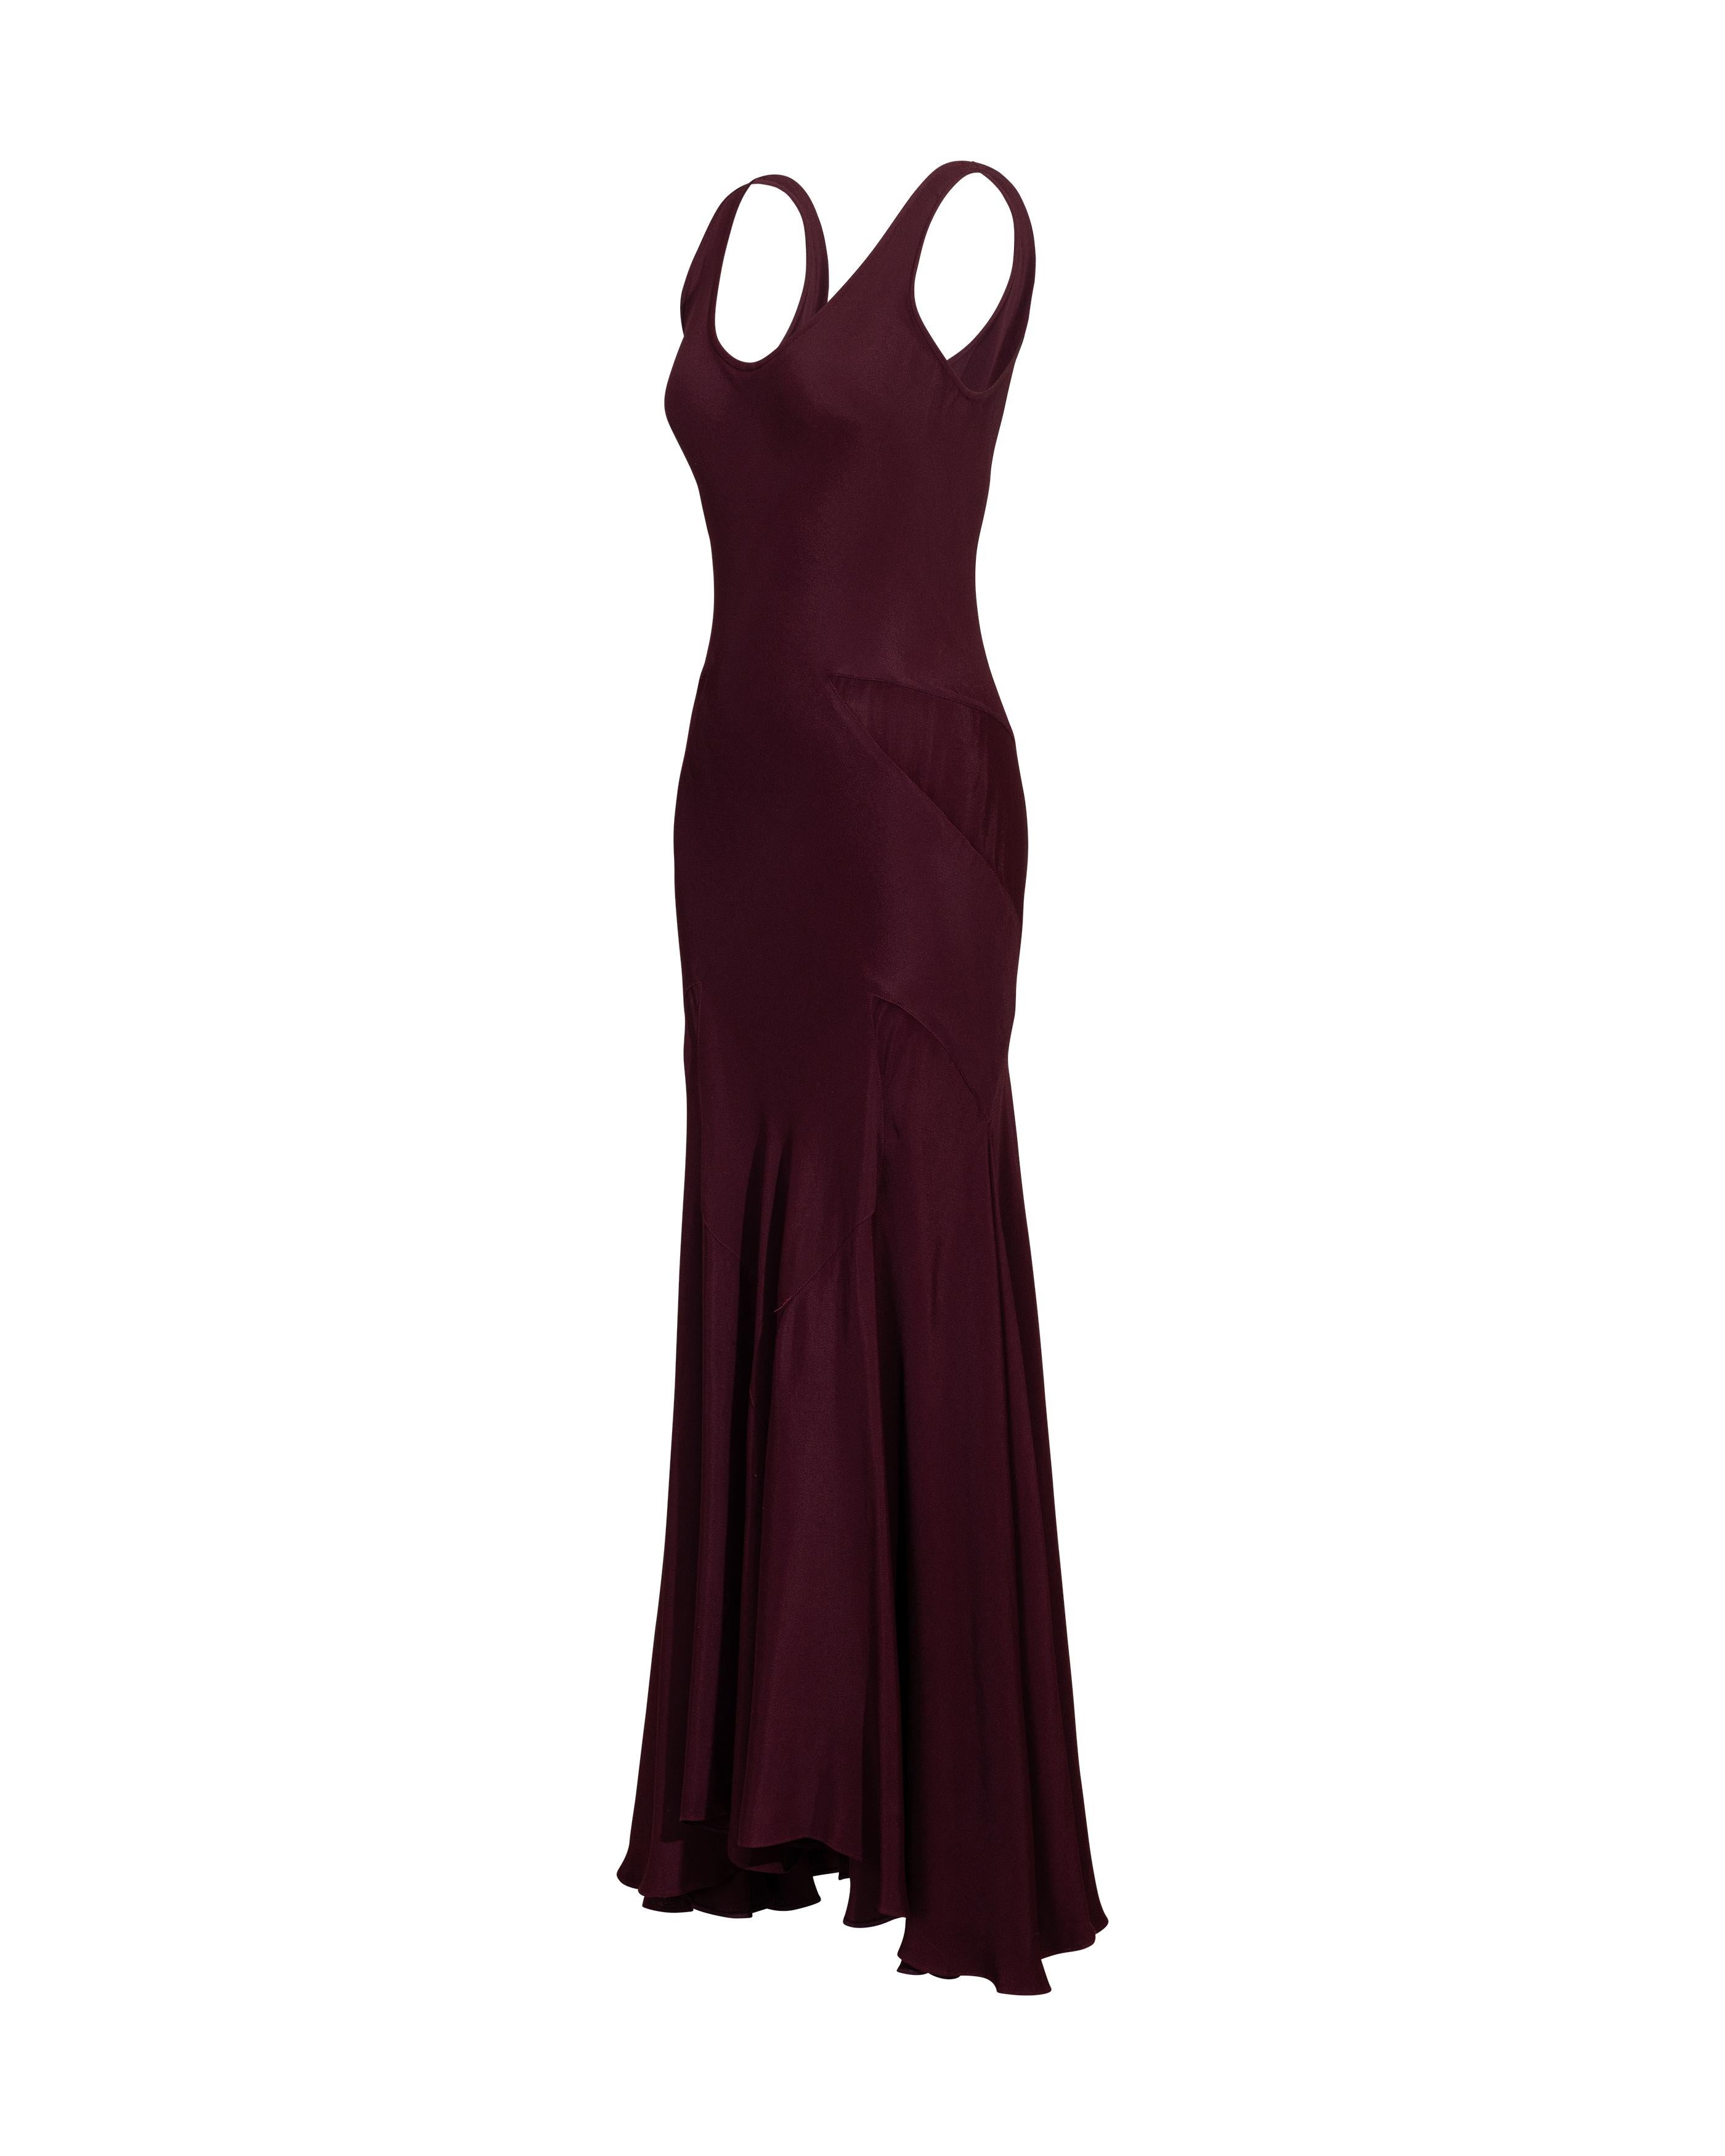 A/W 1988 John Galliano 'Hairclips' Collection Deep Burgundy Bias Cut Gown In Good Condition In North Hollywood, CA